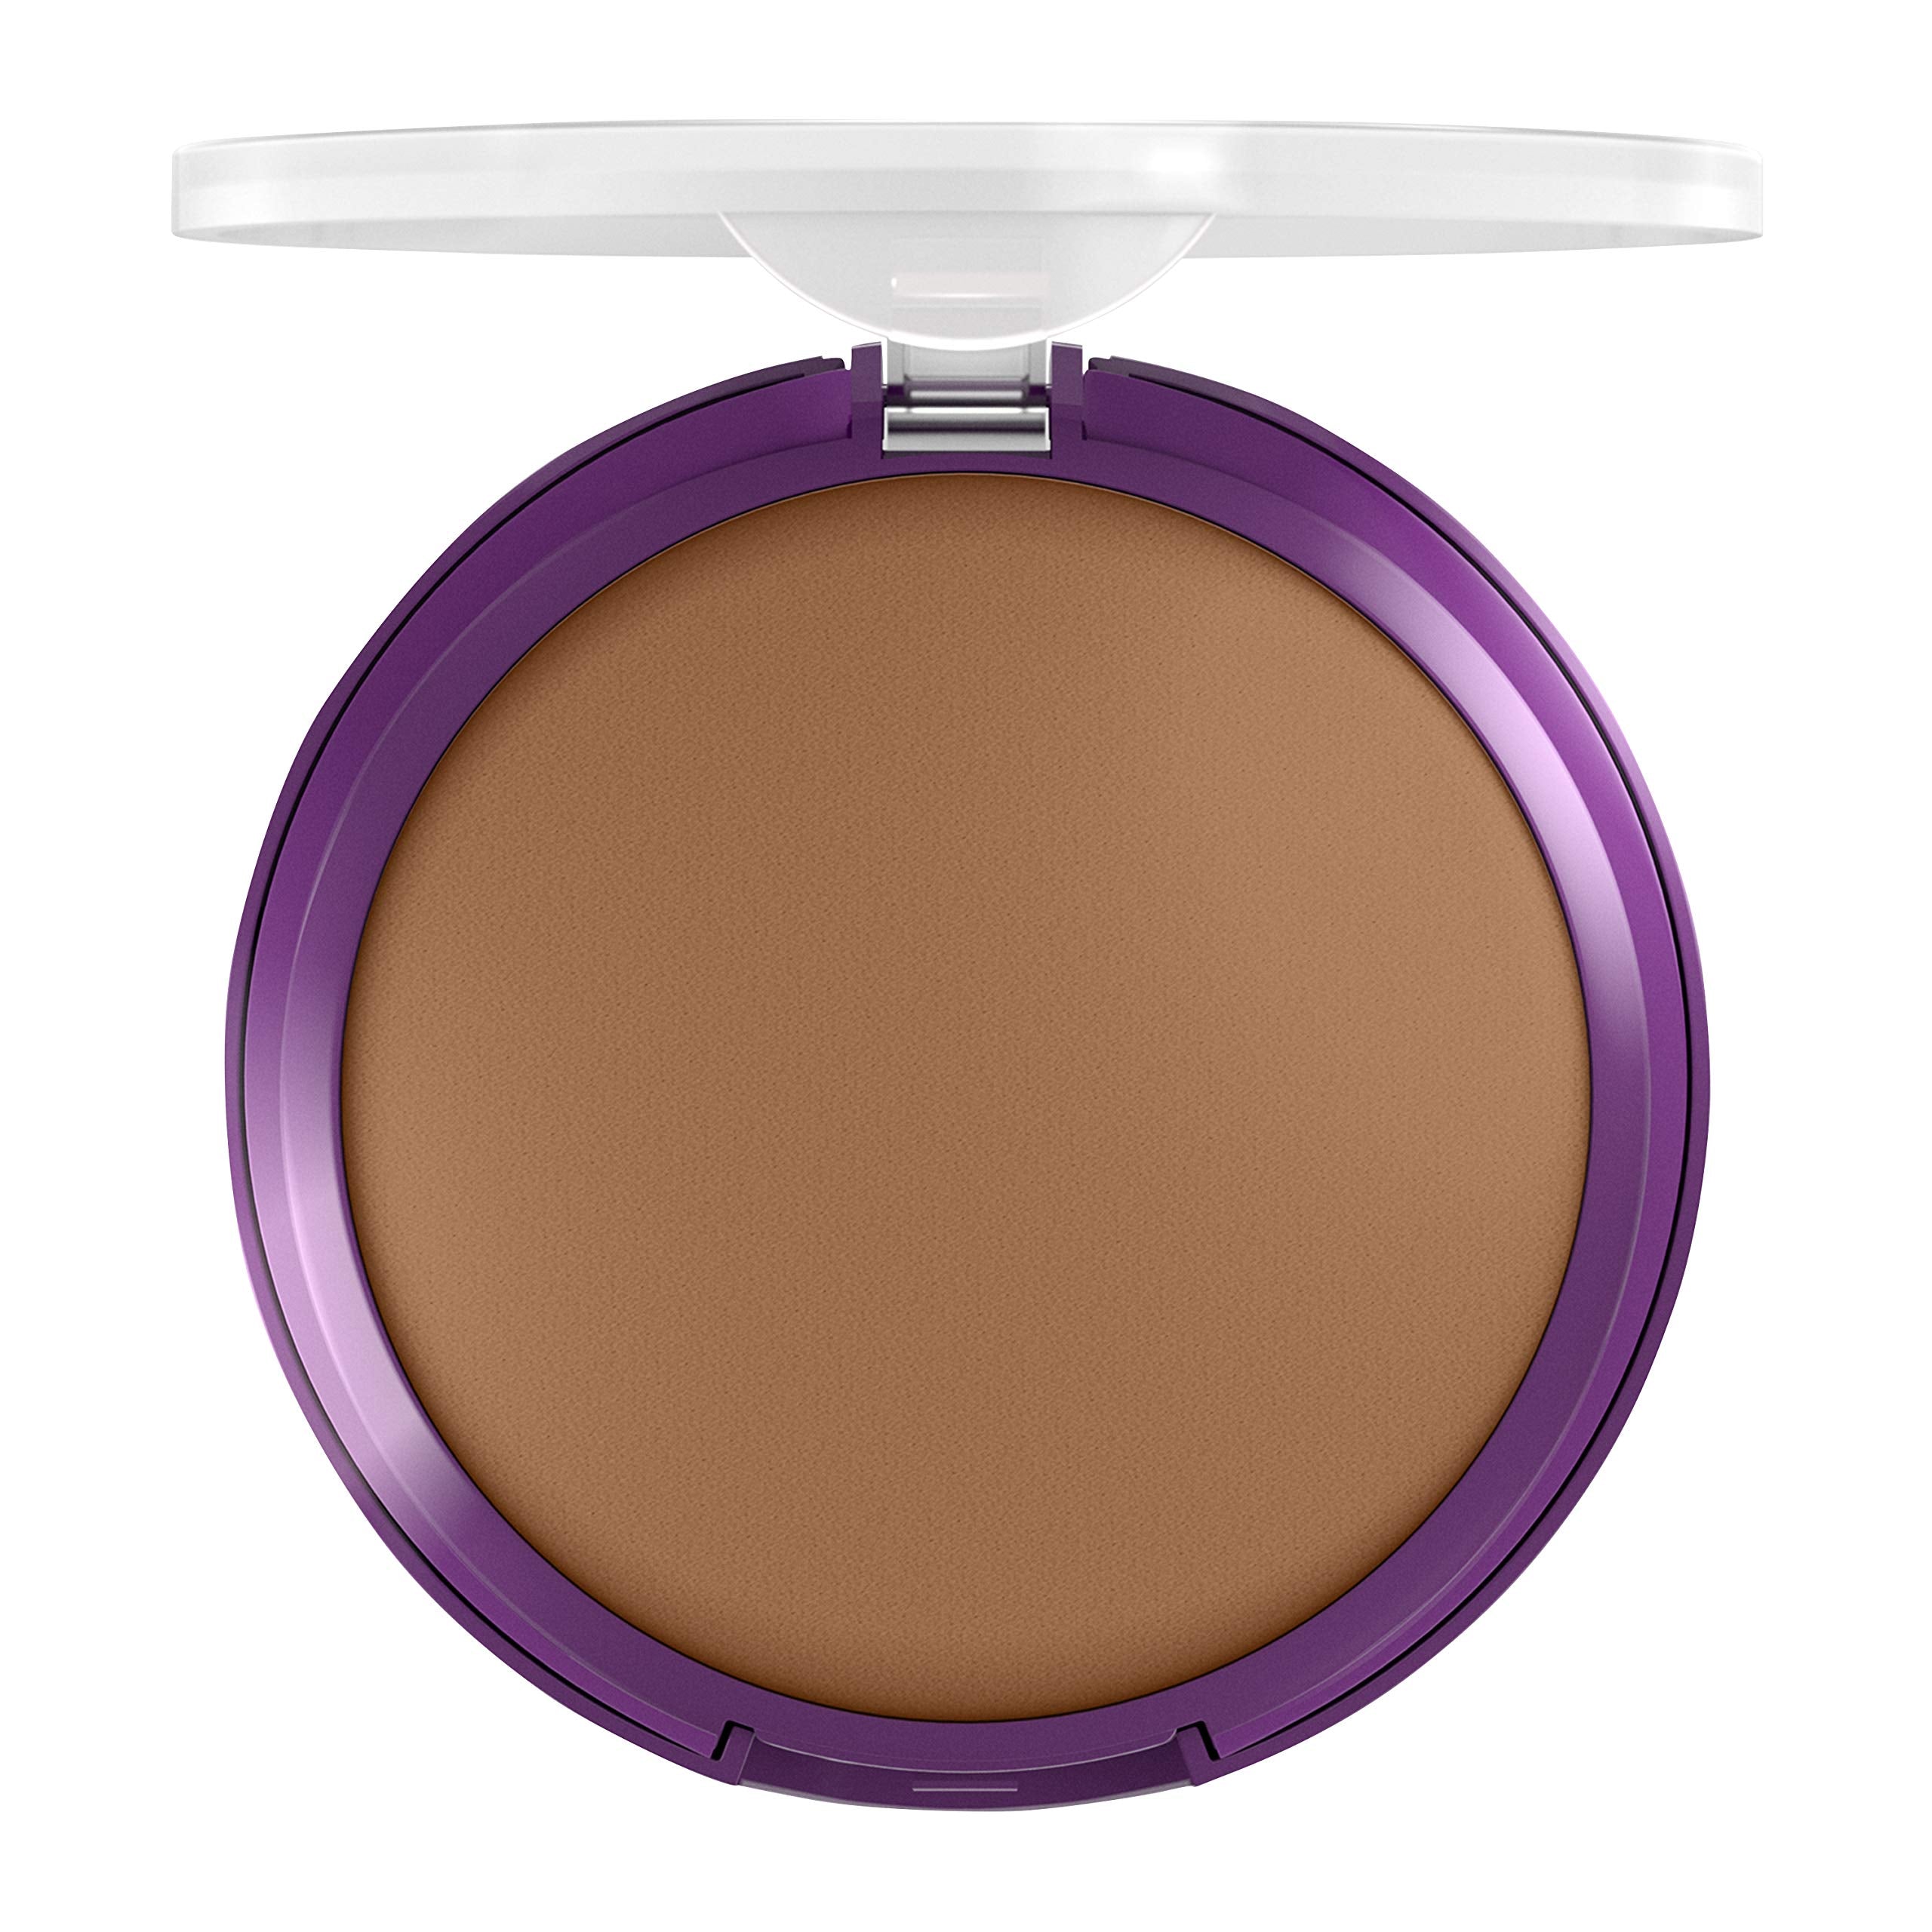 Covergirl Simply Ageless Wrinkle Blurring Pressed Powder Soft Sable #275, 2 Pack (7916665307374)